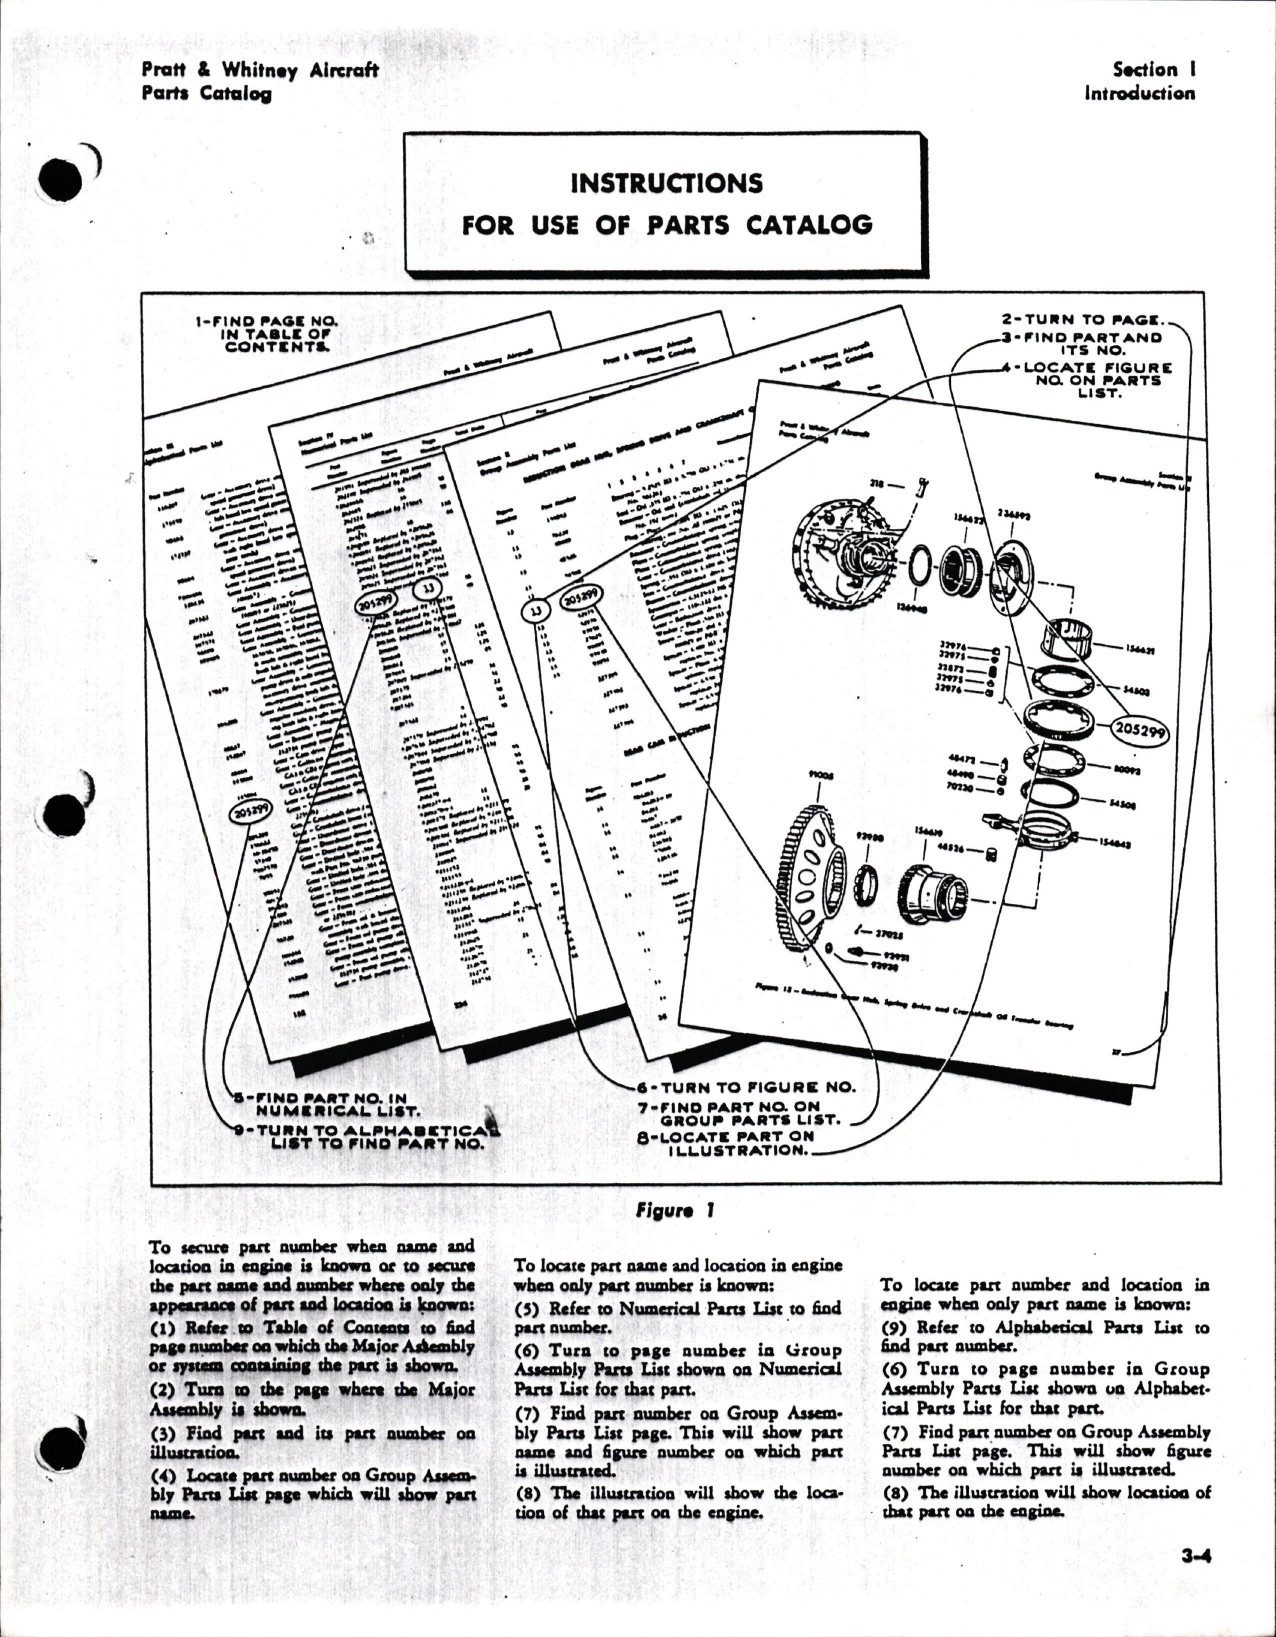 Sample page 9 from AirCorps Library document: Illustrated Parts Catalog for Double Wasp - CA-3, CA18, CB3, CB16, and CB17 Engines